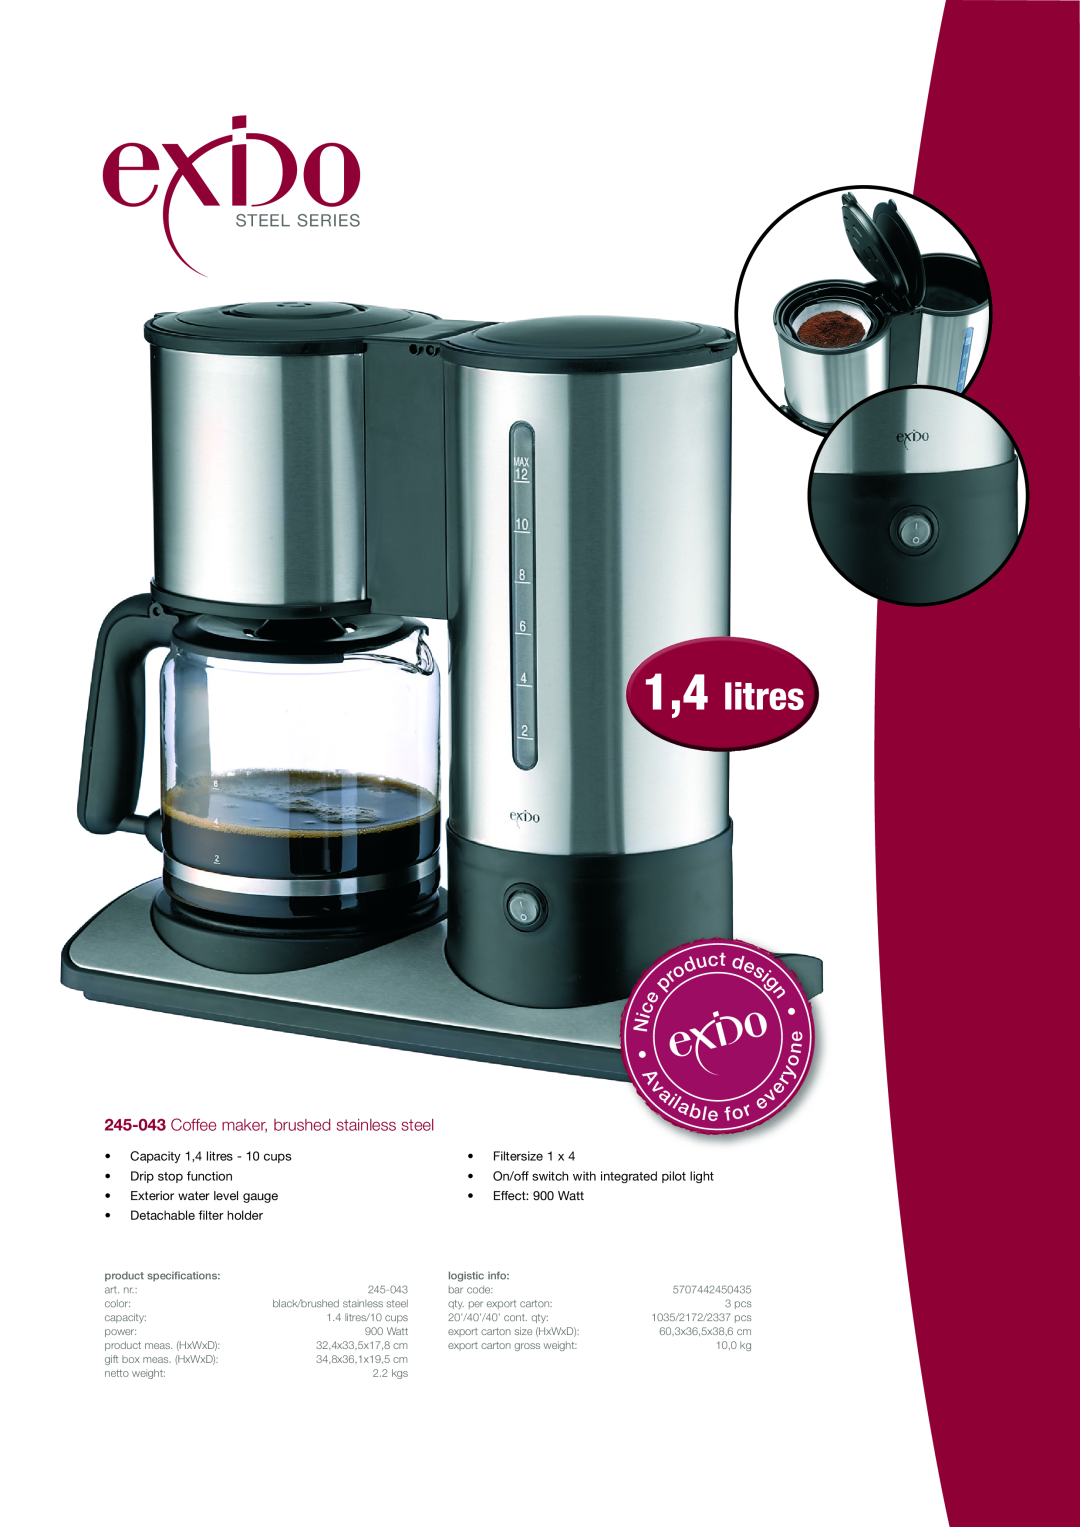 Melissa 245-043 specifications 1,4 litres, Steel Series, Coffee maker, brushed stainless steel, Detachable filter holder 